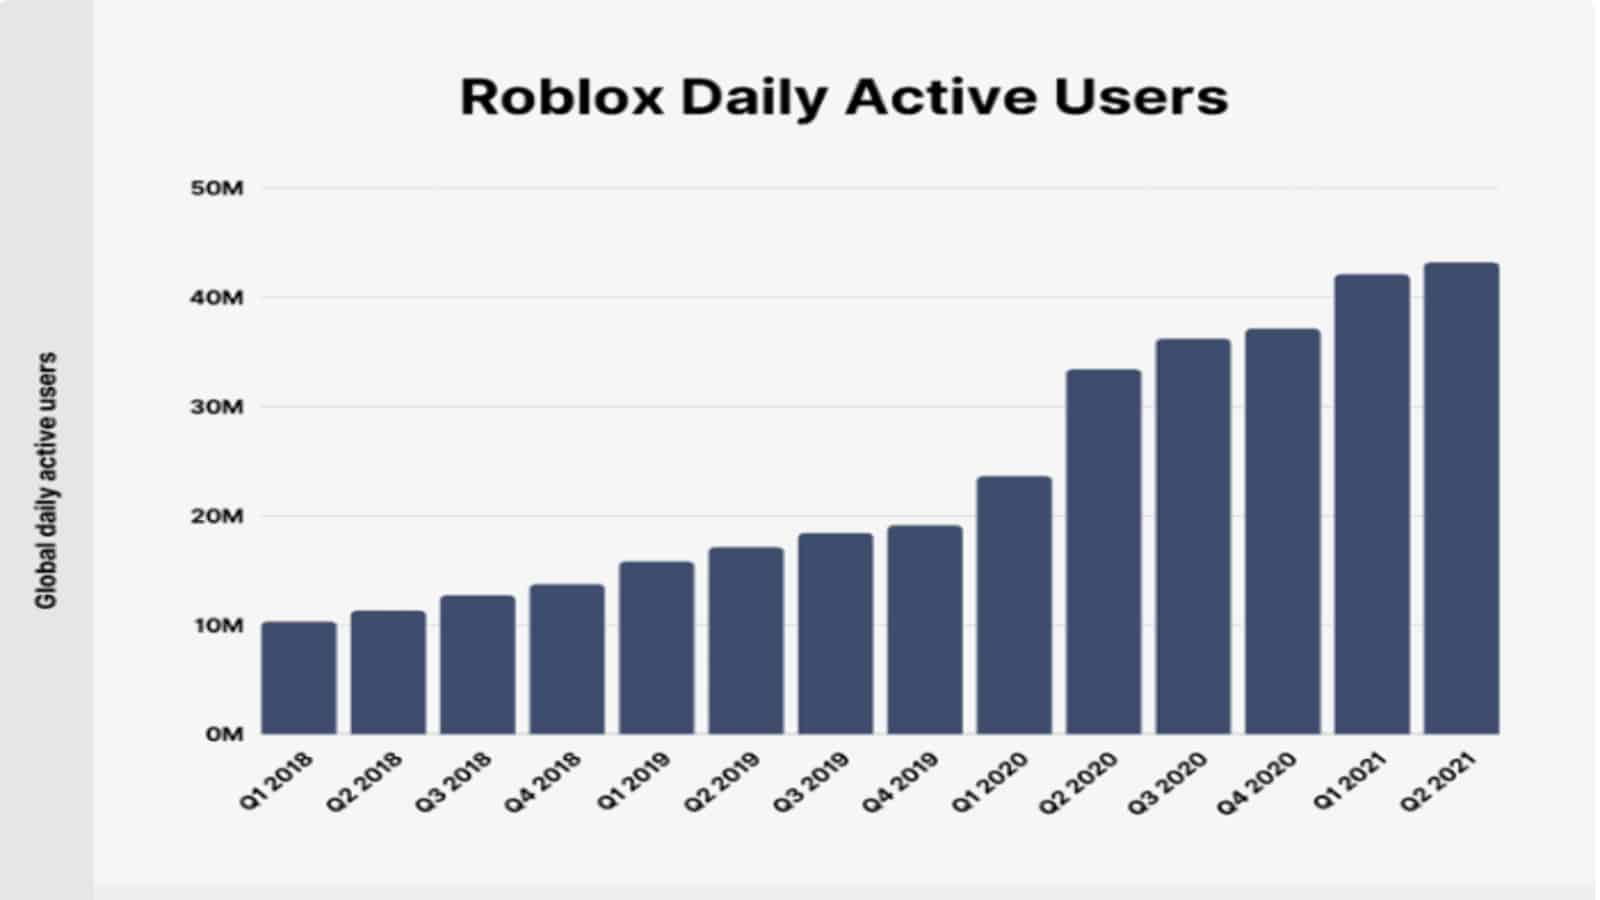 Backlinko's data suggests that Roblox is growing rapidly